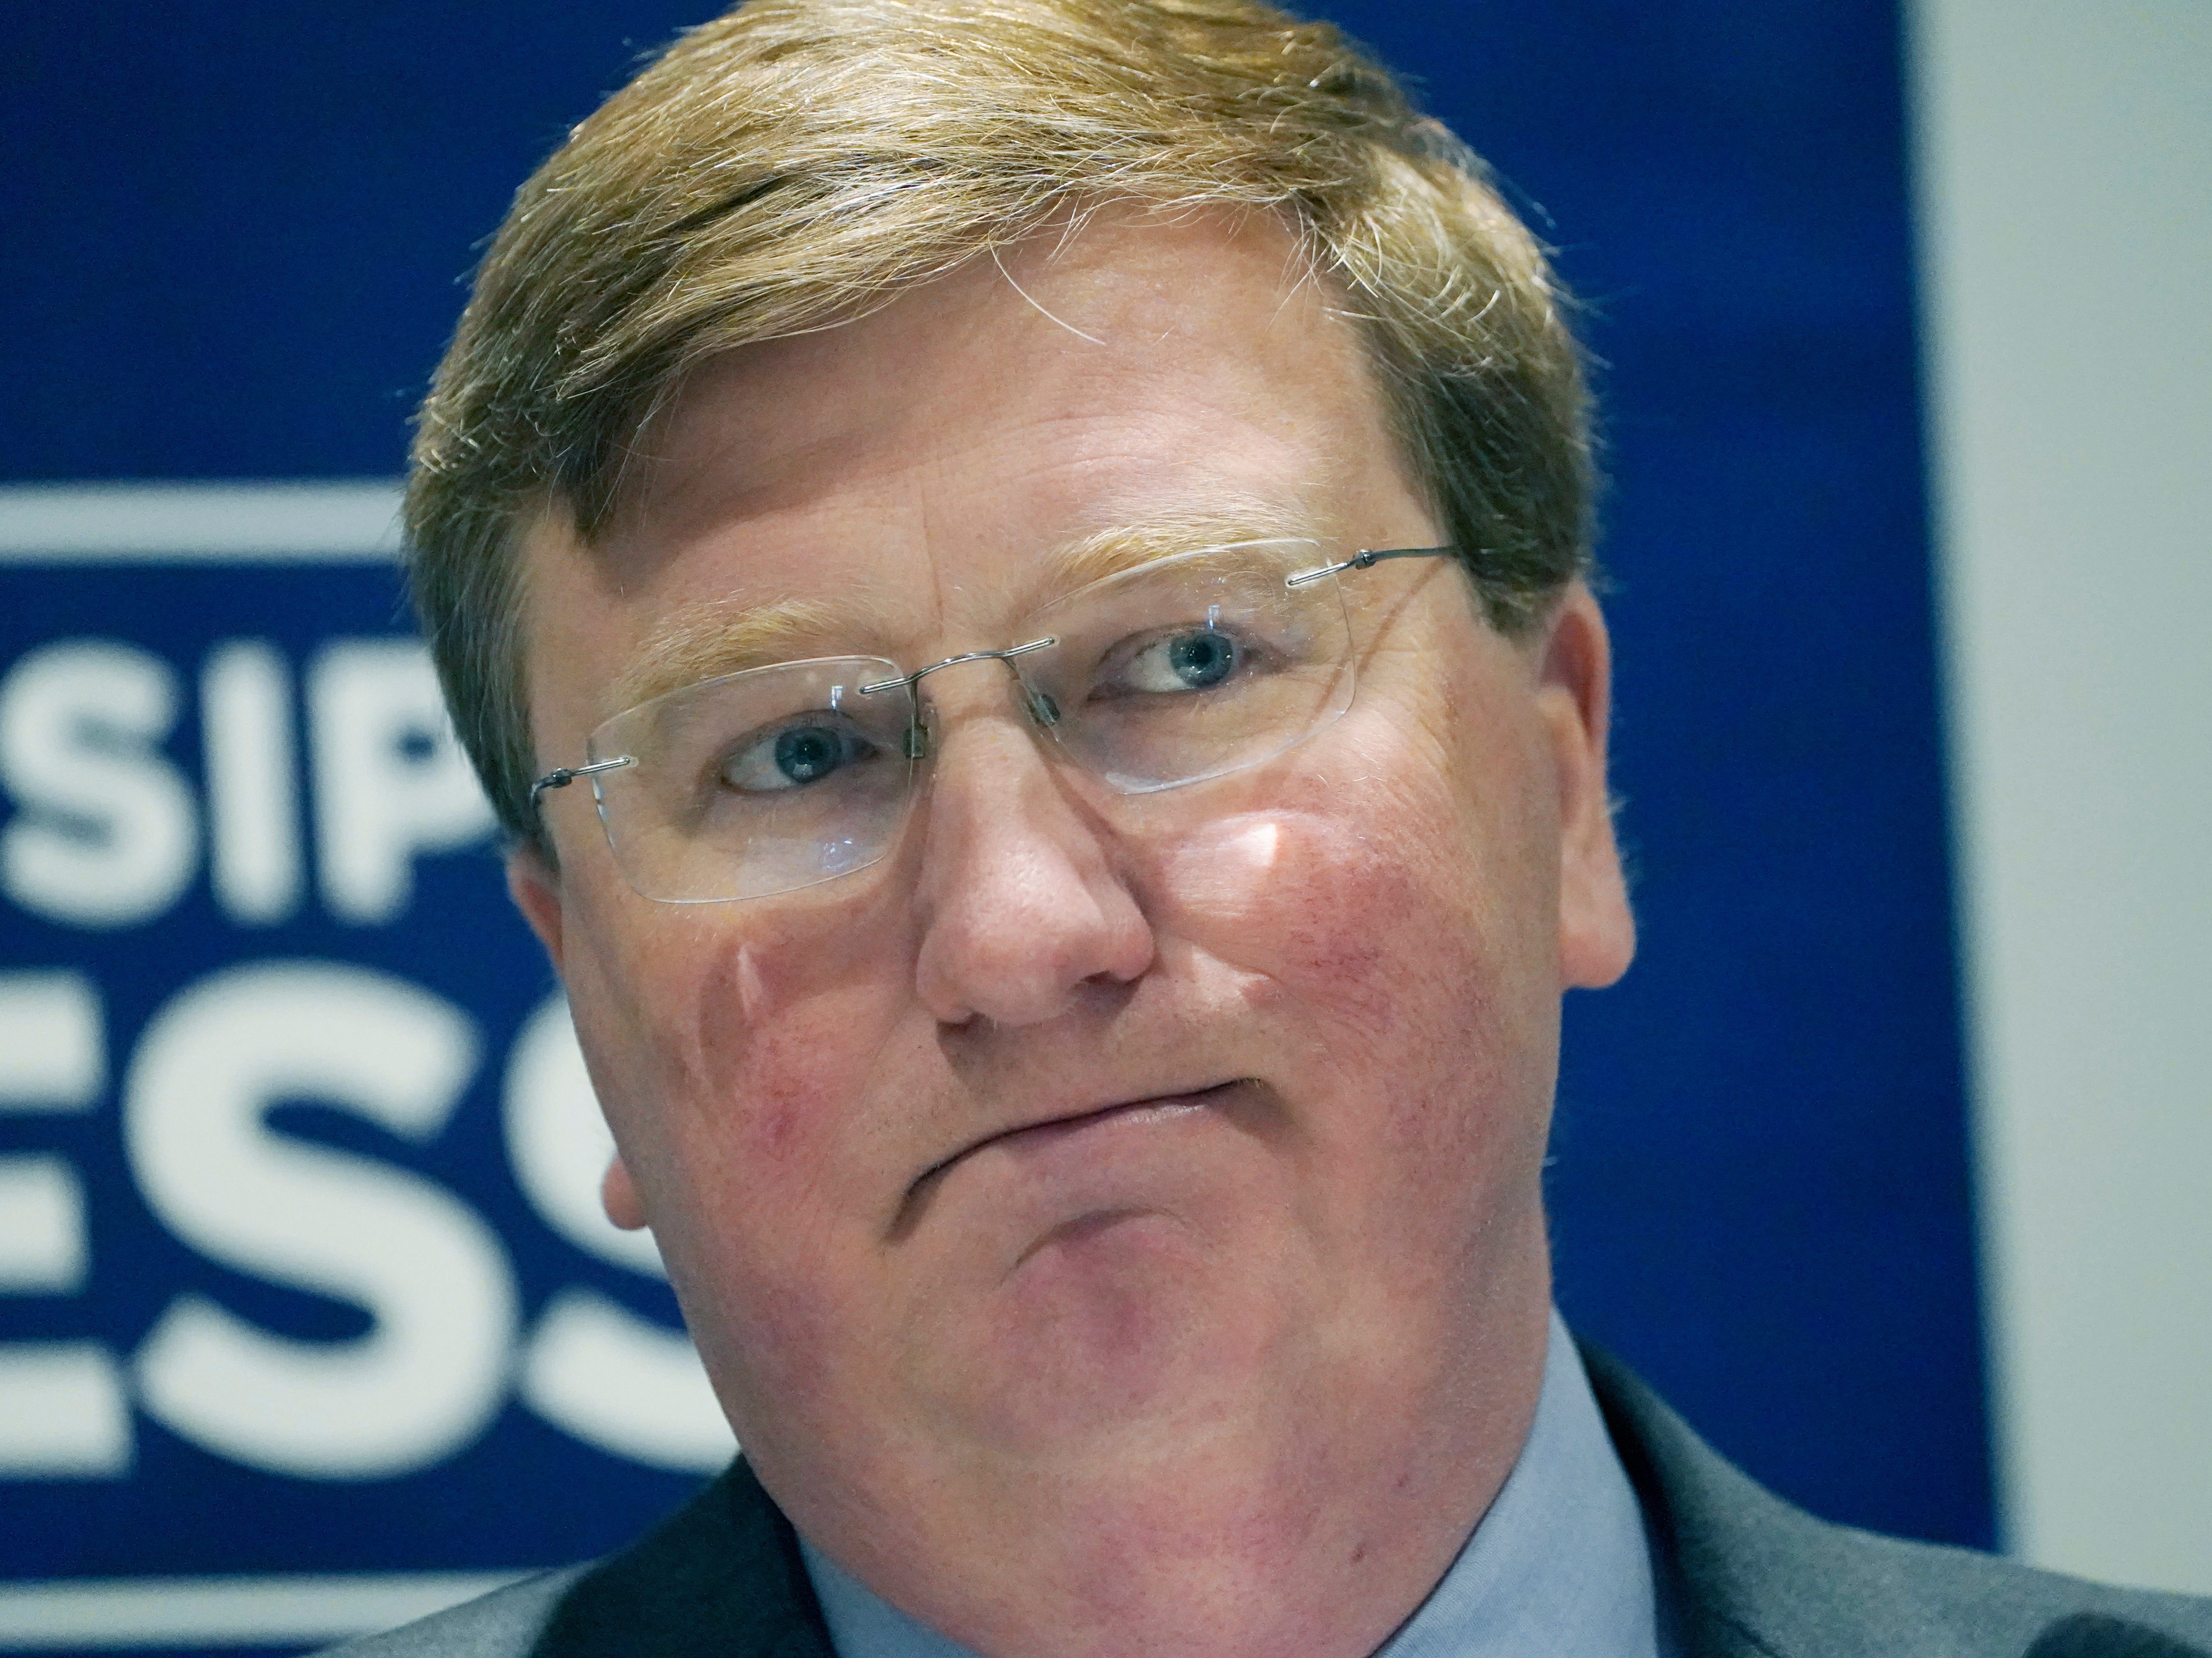 Tate Reeves is hoping to get re-elected as governor of Mississippi on 7 November